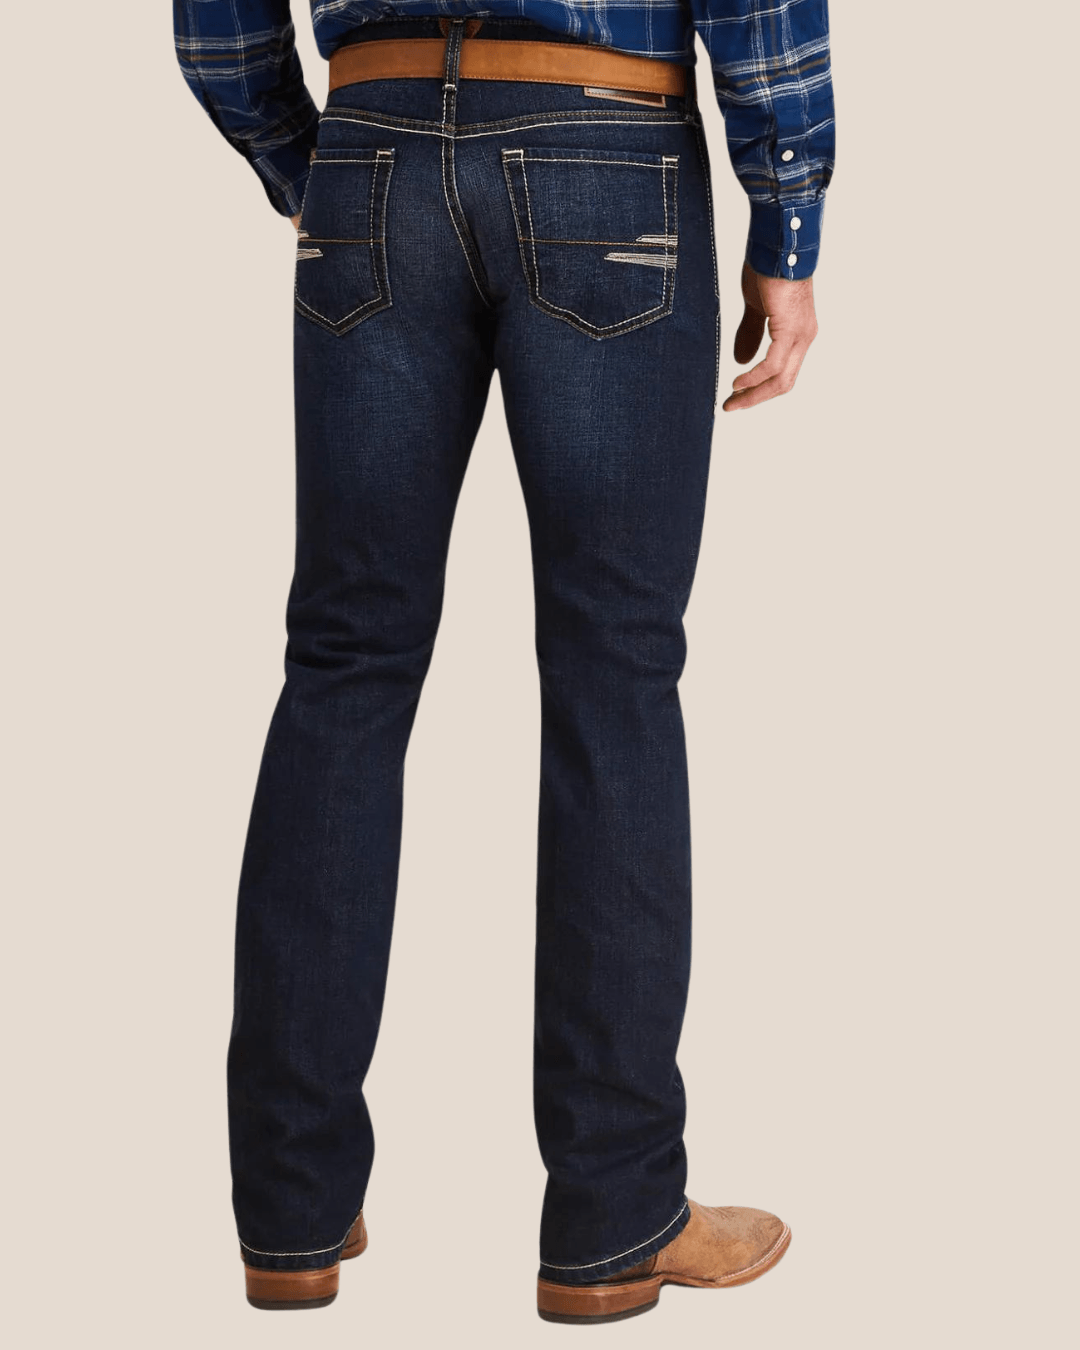 Men’s Slim Fit Jeans - Painted Cowgirl Western Store